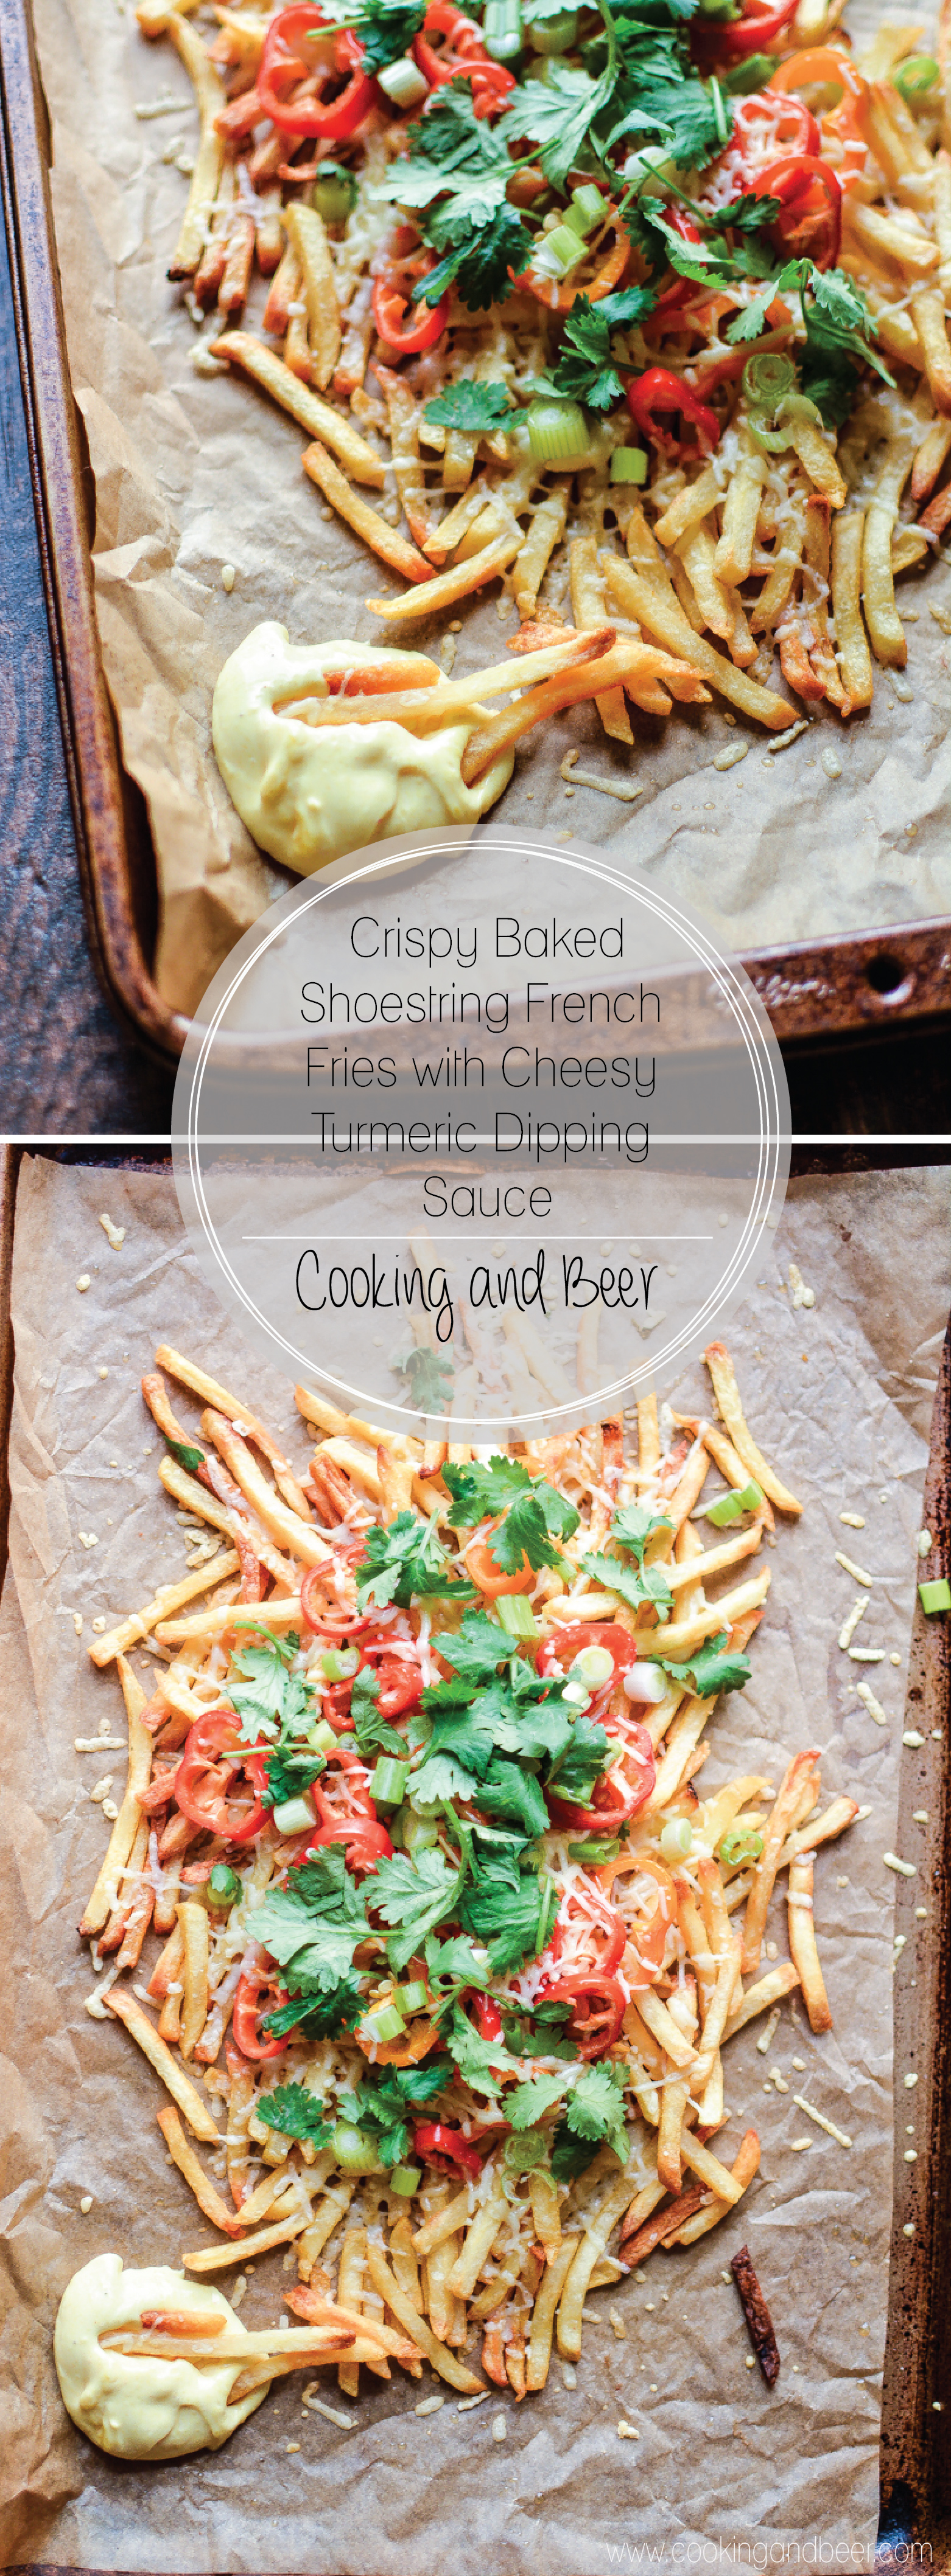 Crispy Baked Shoestring French Fries are a simple and quick game day recipe that will keep you out of the kitchen and enjoying the game!